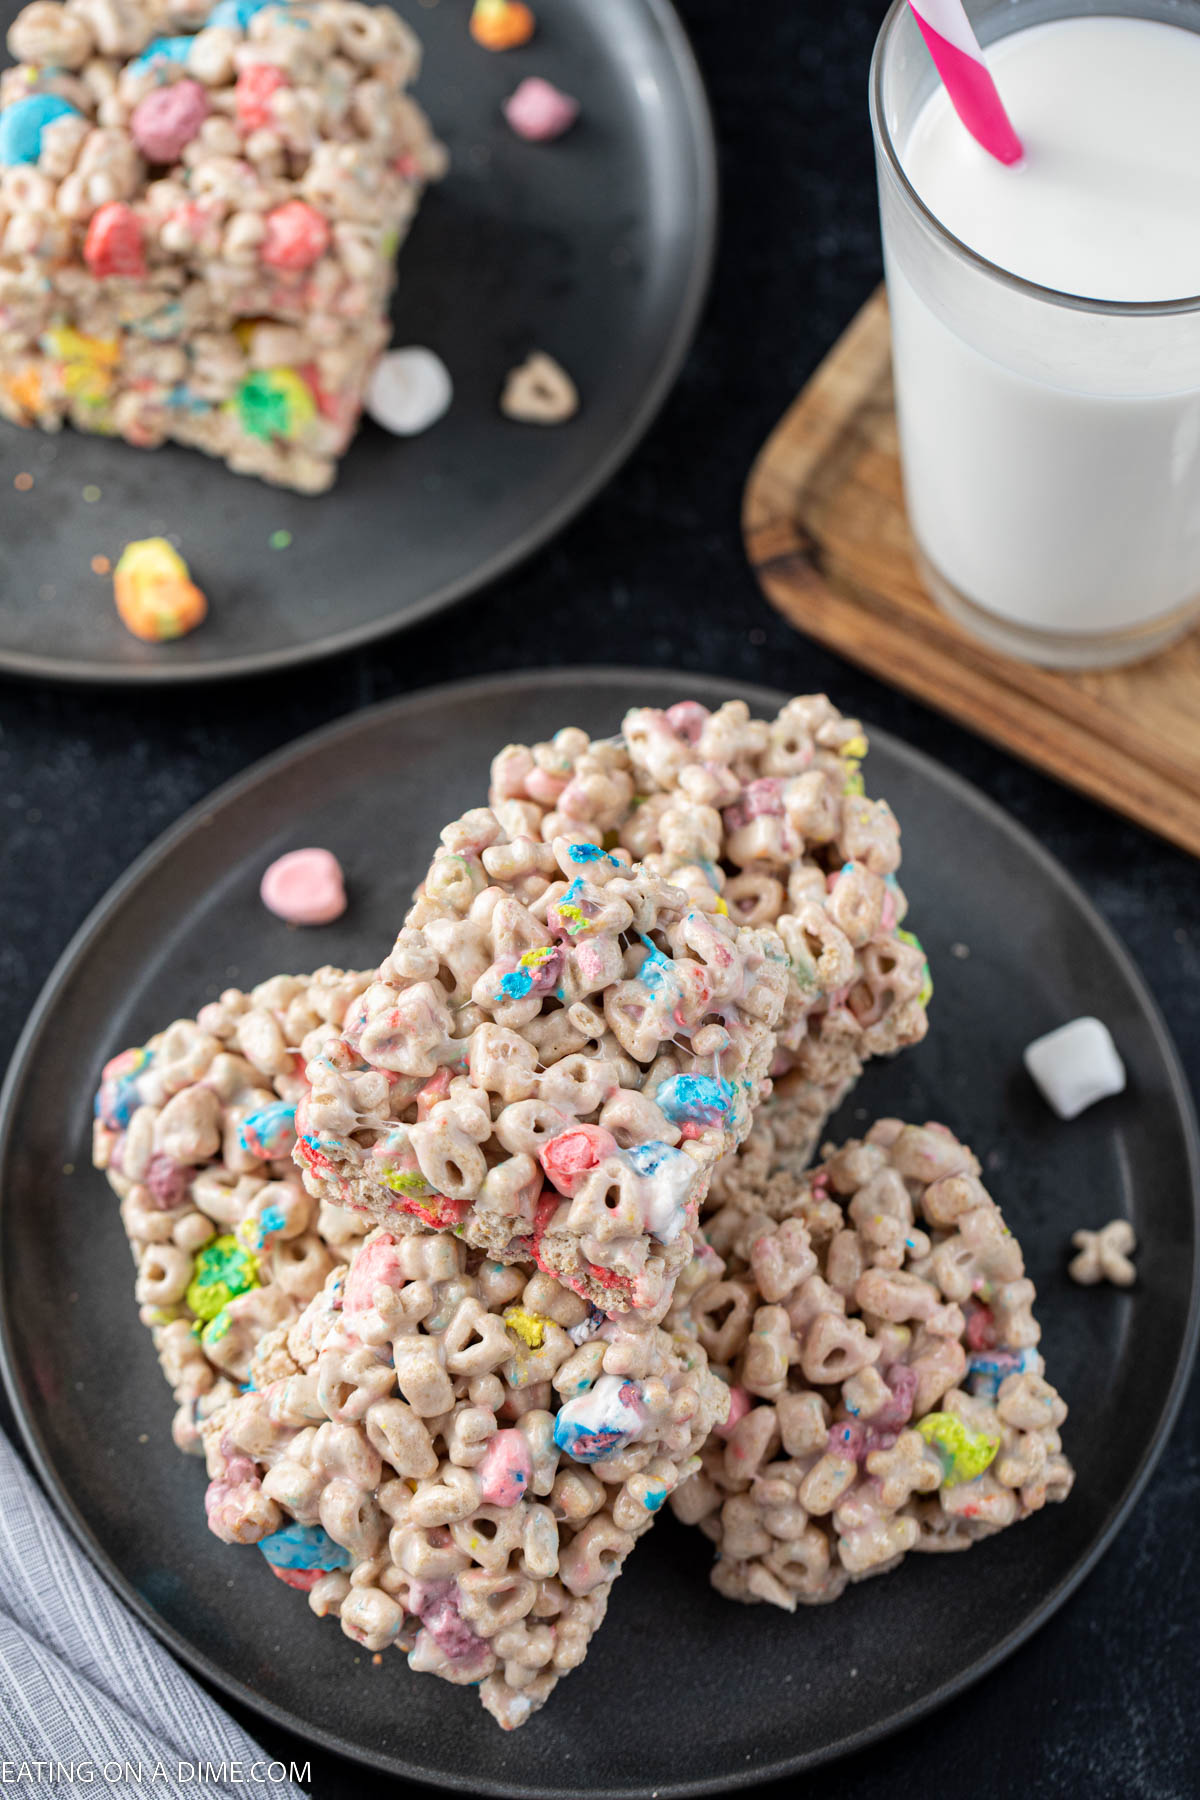 A stack of lucky charm treats on a charcoal plate with a glass of milk behind them.  